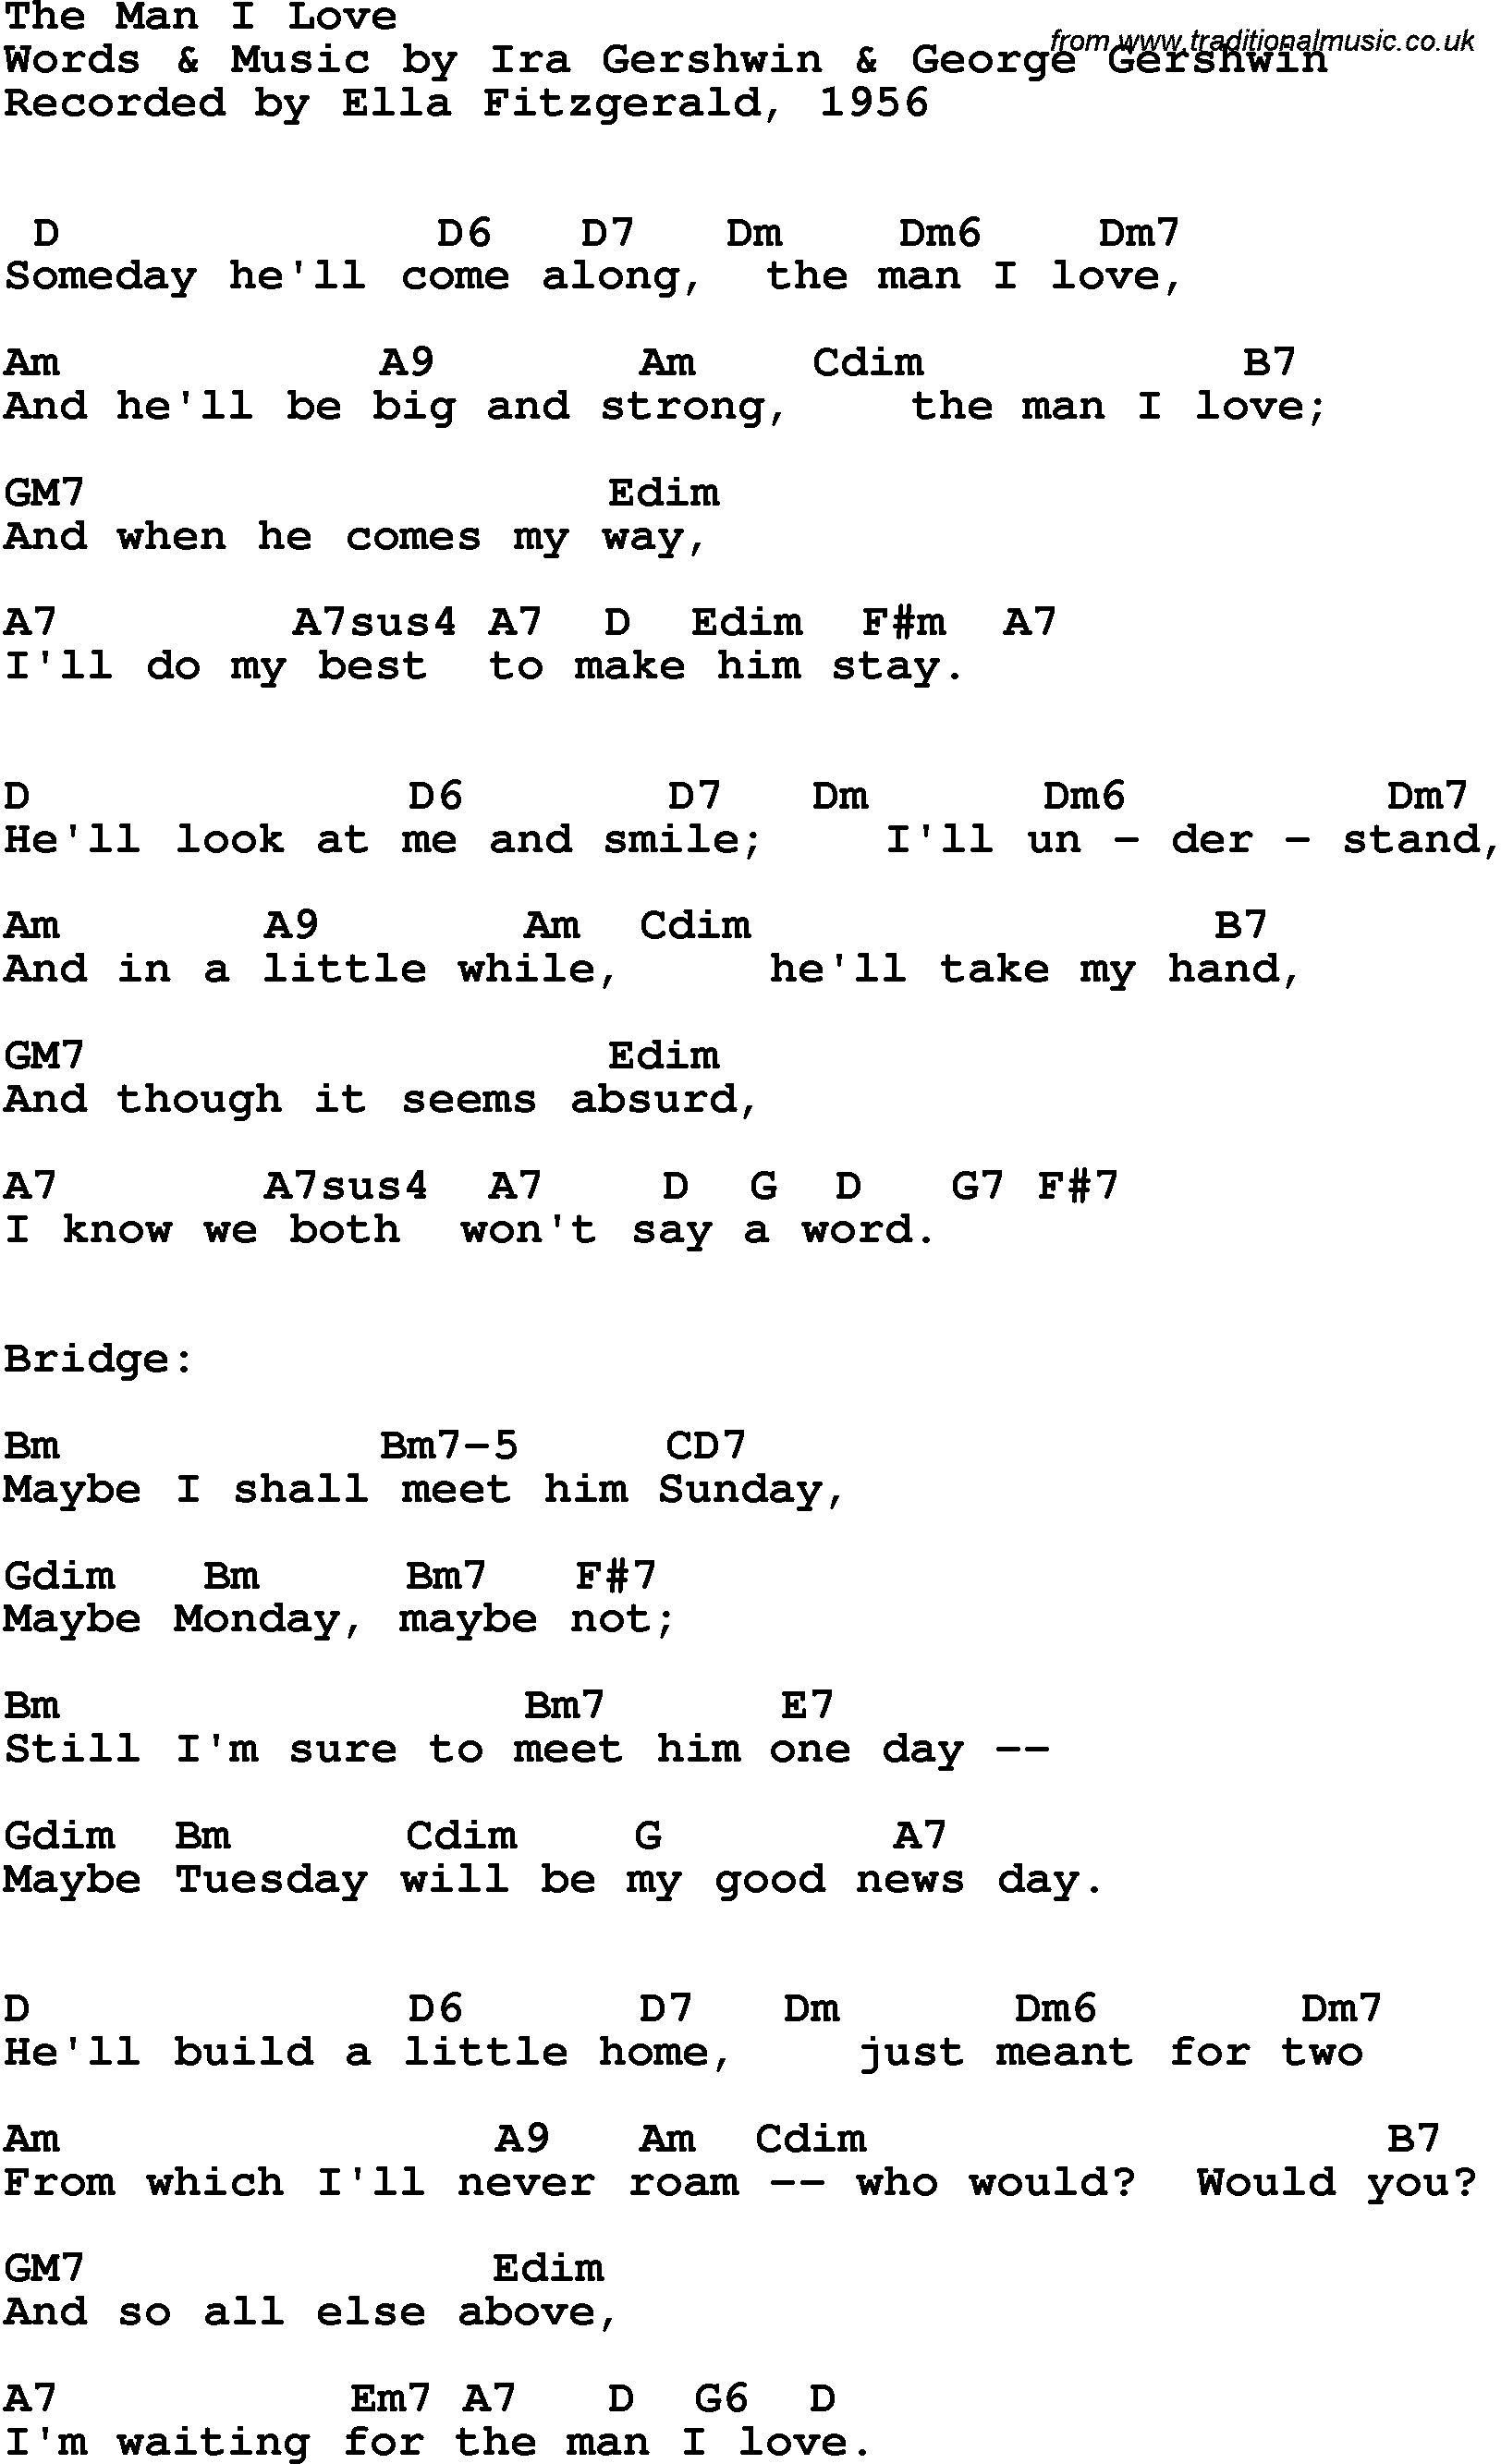 Song Lyrics with guitar chords for Man I Love, The - Ella Fitzgerald, 1956